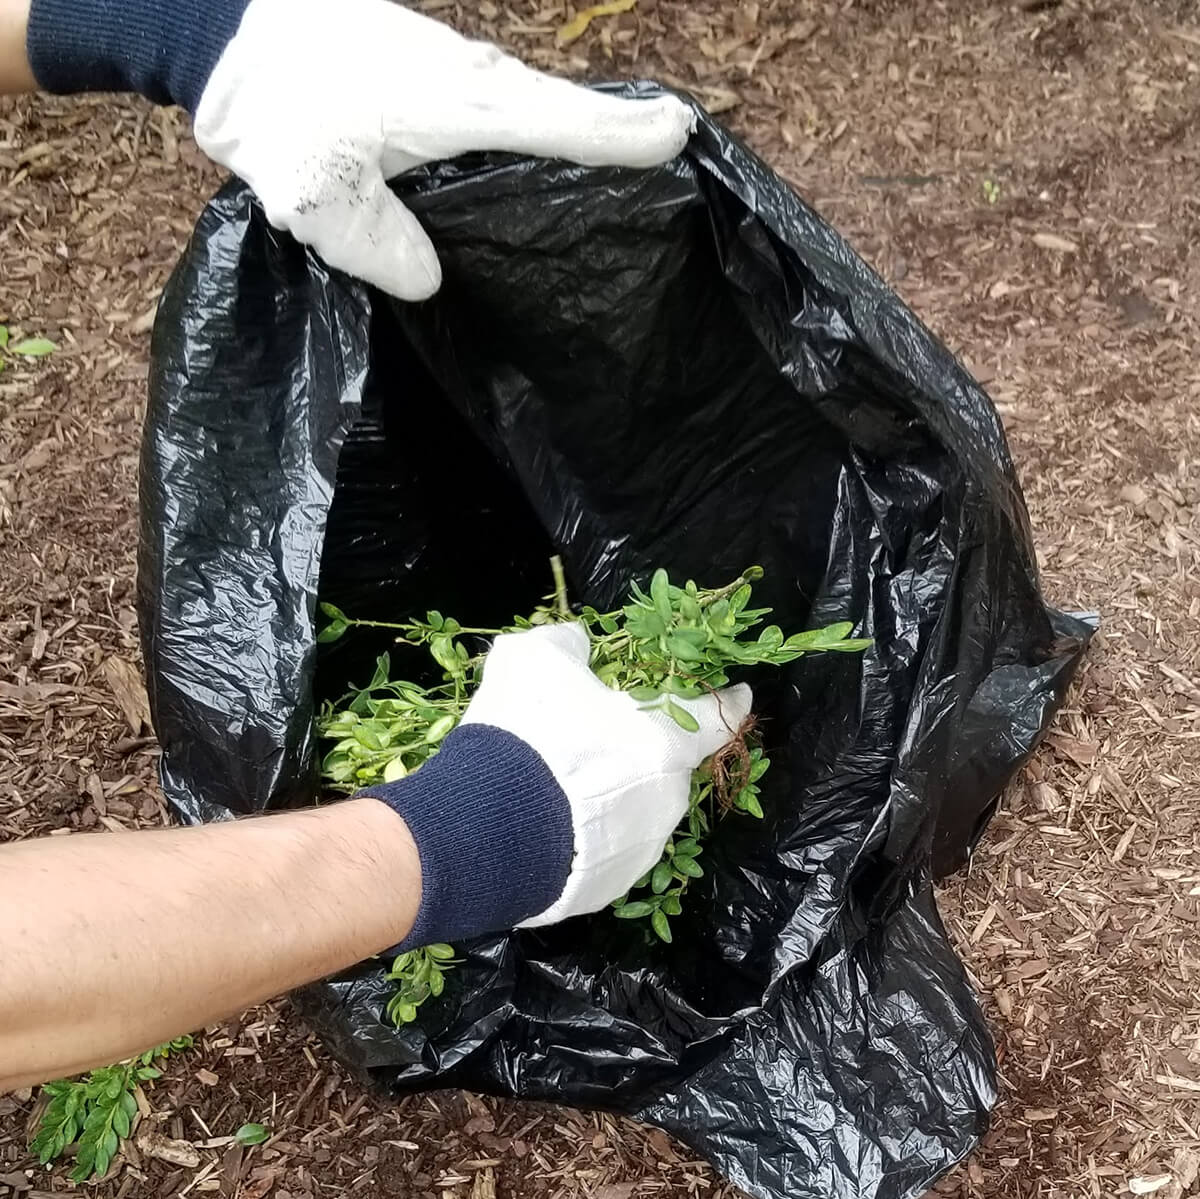 boxwood clippings being placed in a black plastic bag